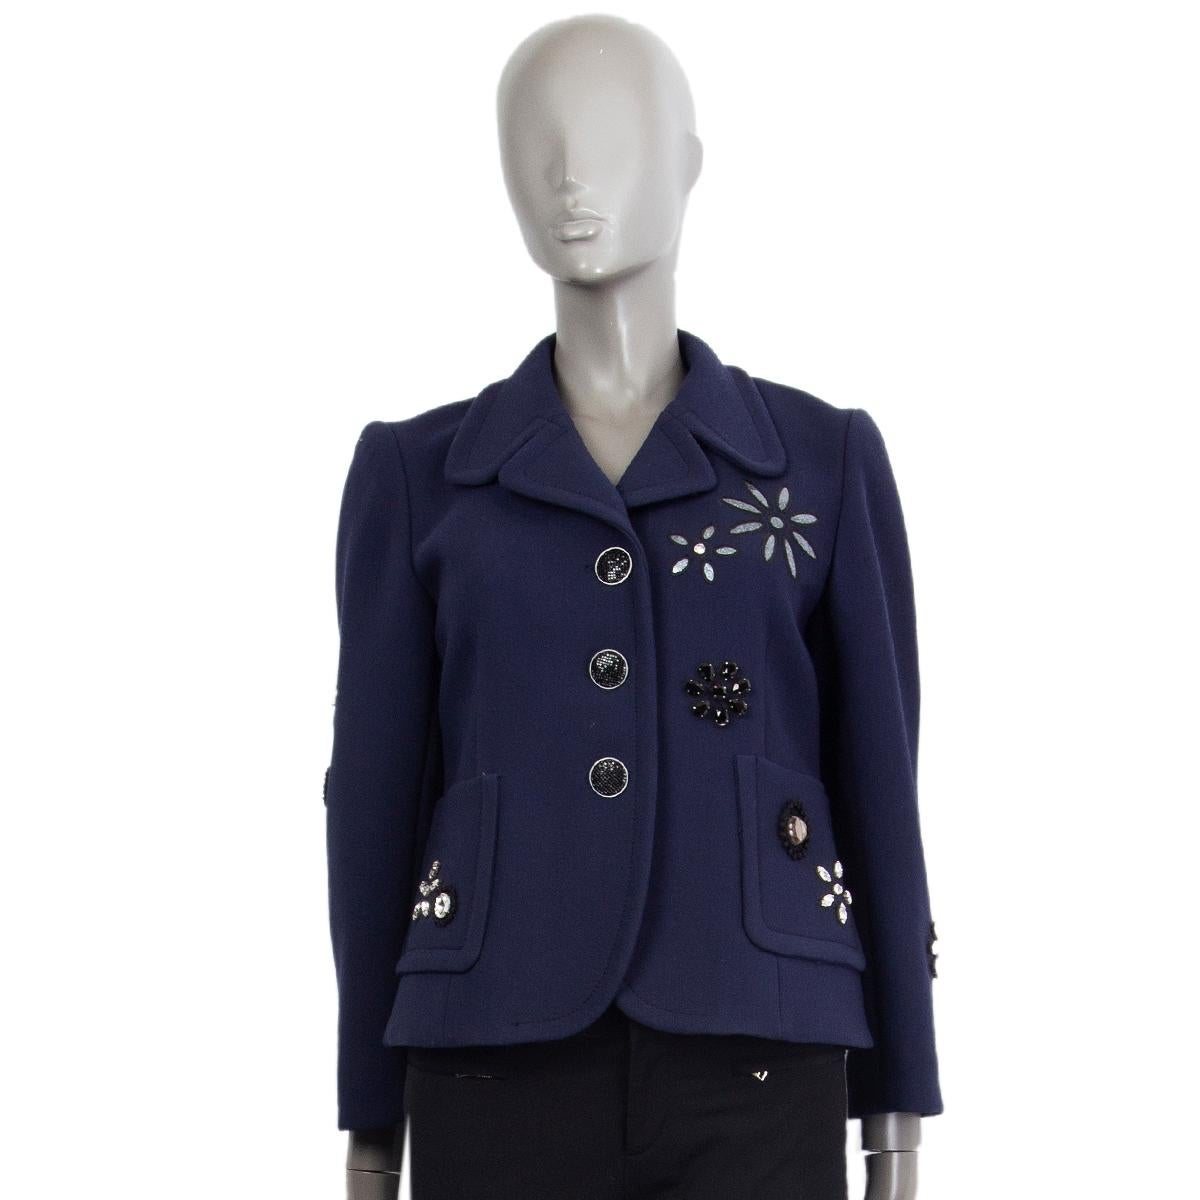 MARC JACOBS navy blue wool BEADED FLOWER SHORT PEACOAT Coat Jacket 8 M In Excellent Condition For Sale In Zürich, CH